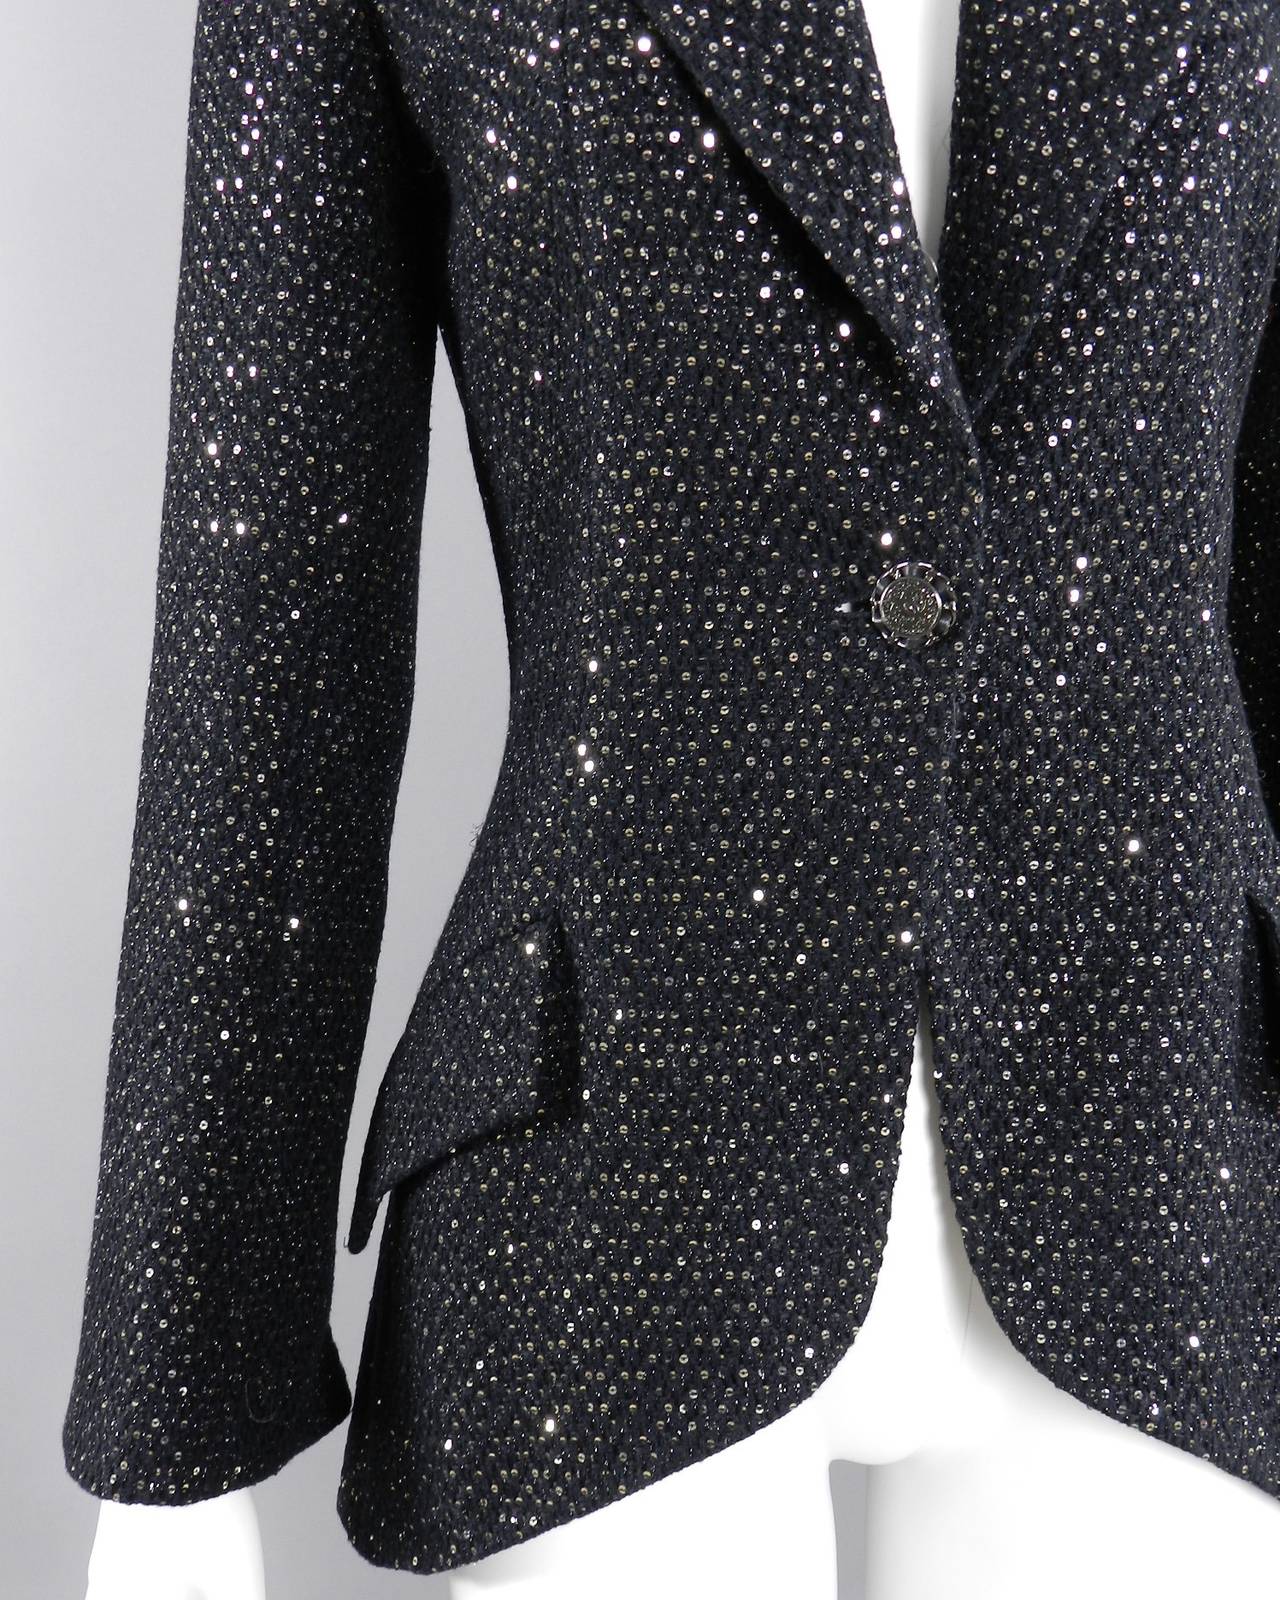 Chanel 11C Black Ad Campaign / Runway Jacket with Silver Sequins 2